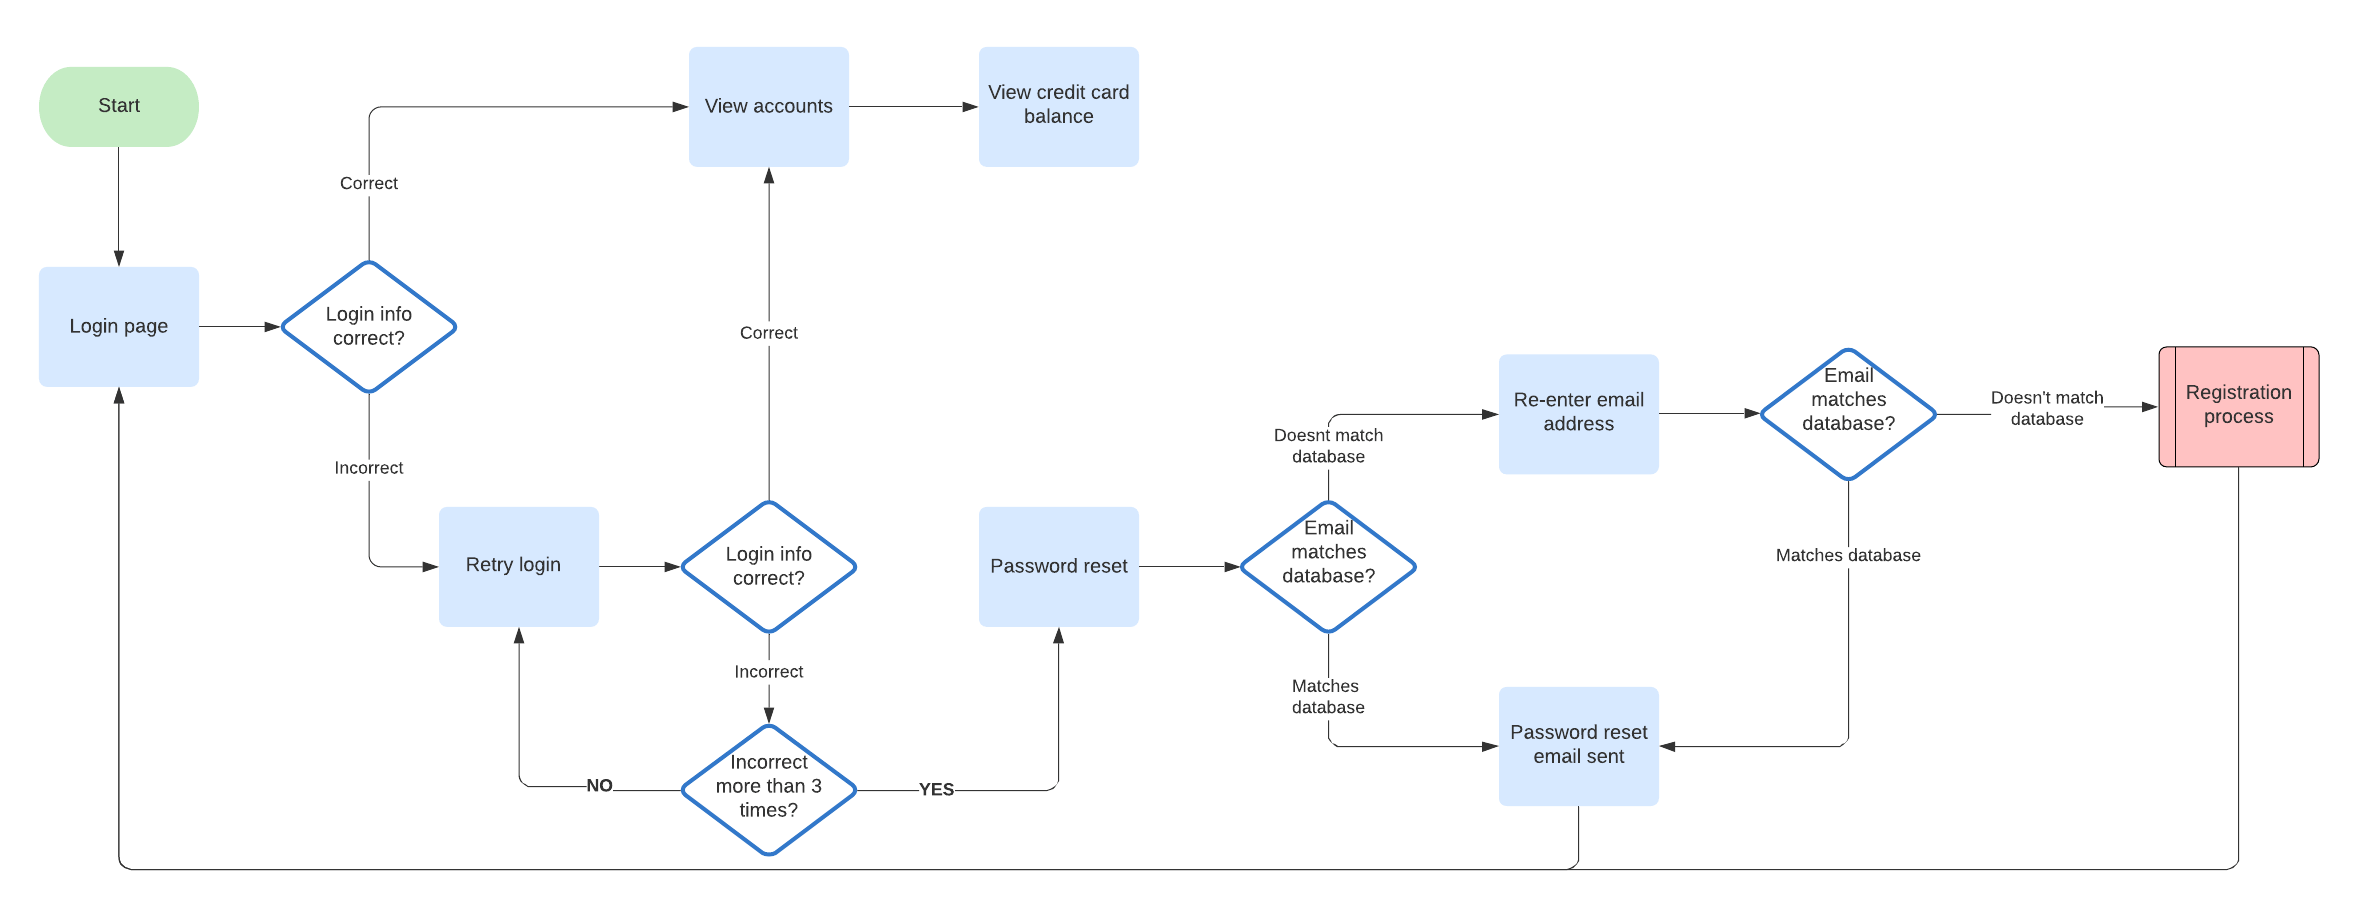 Create user journey maps for different personas